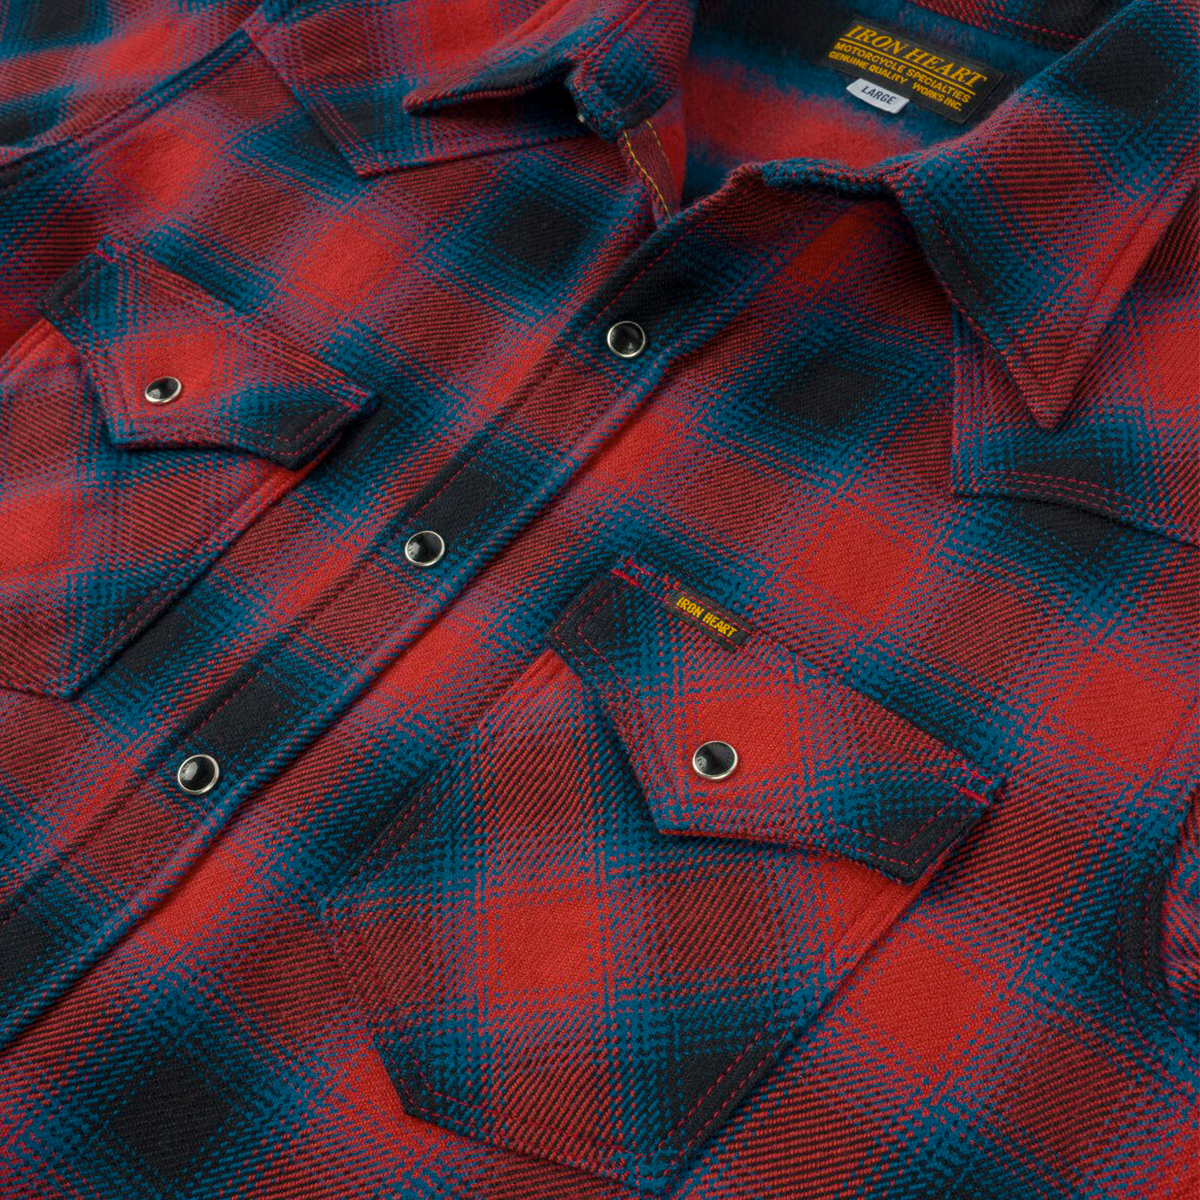 Ultra Heavy Flannel Ombré Check Western Shirt Red